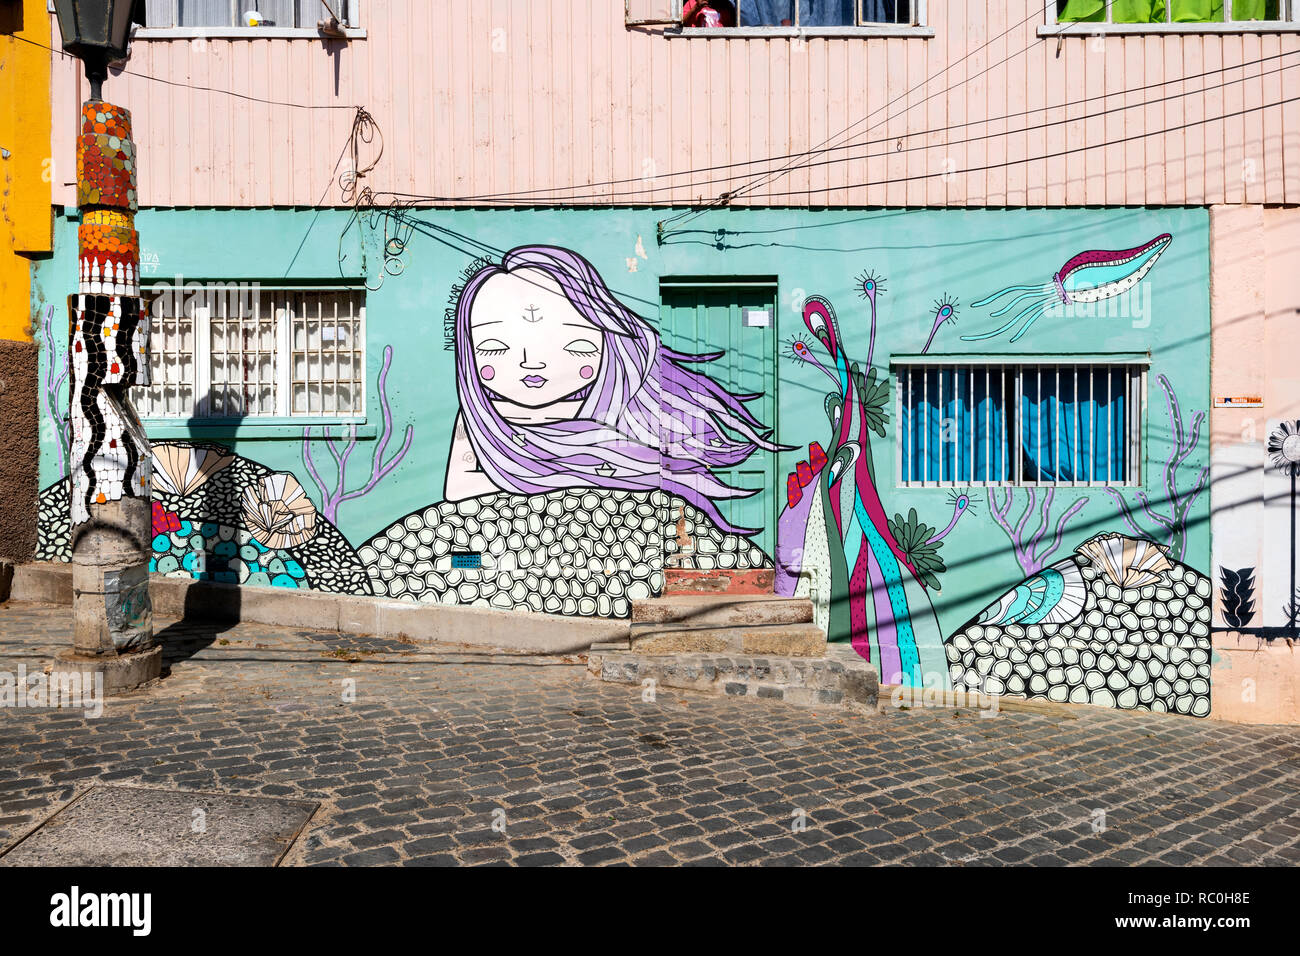 A house front artistically decorated and painted, in a street in Valparaiso, Chile. Stock Photo